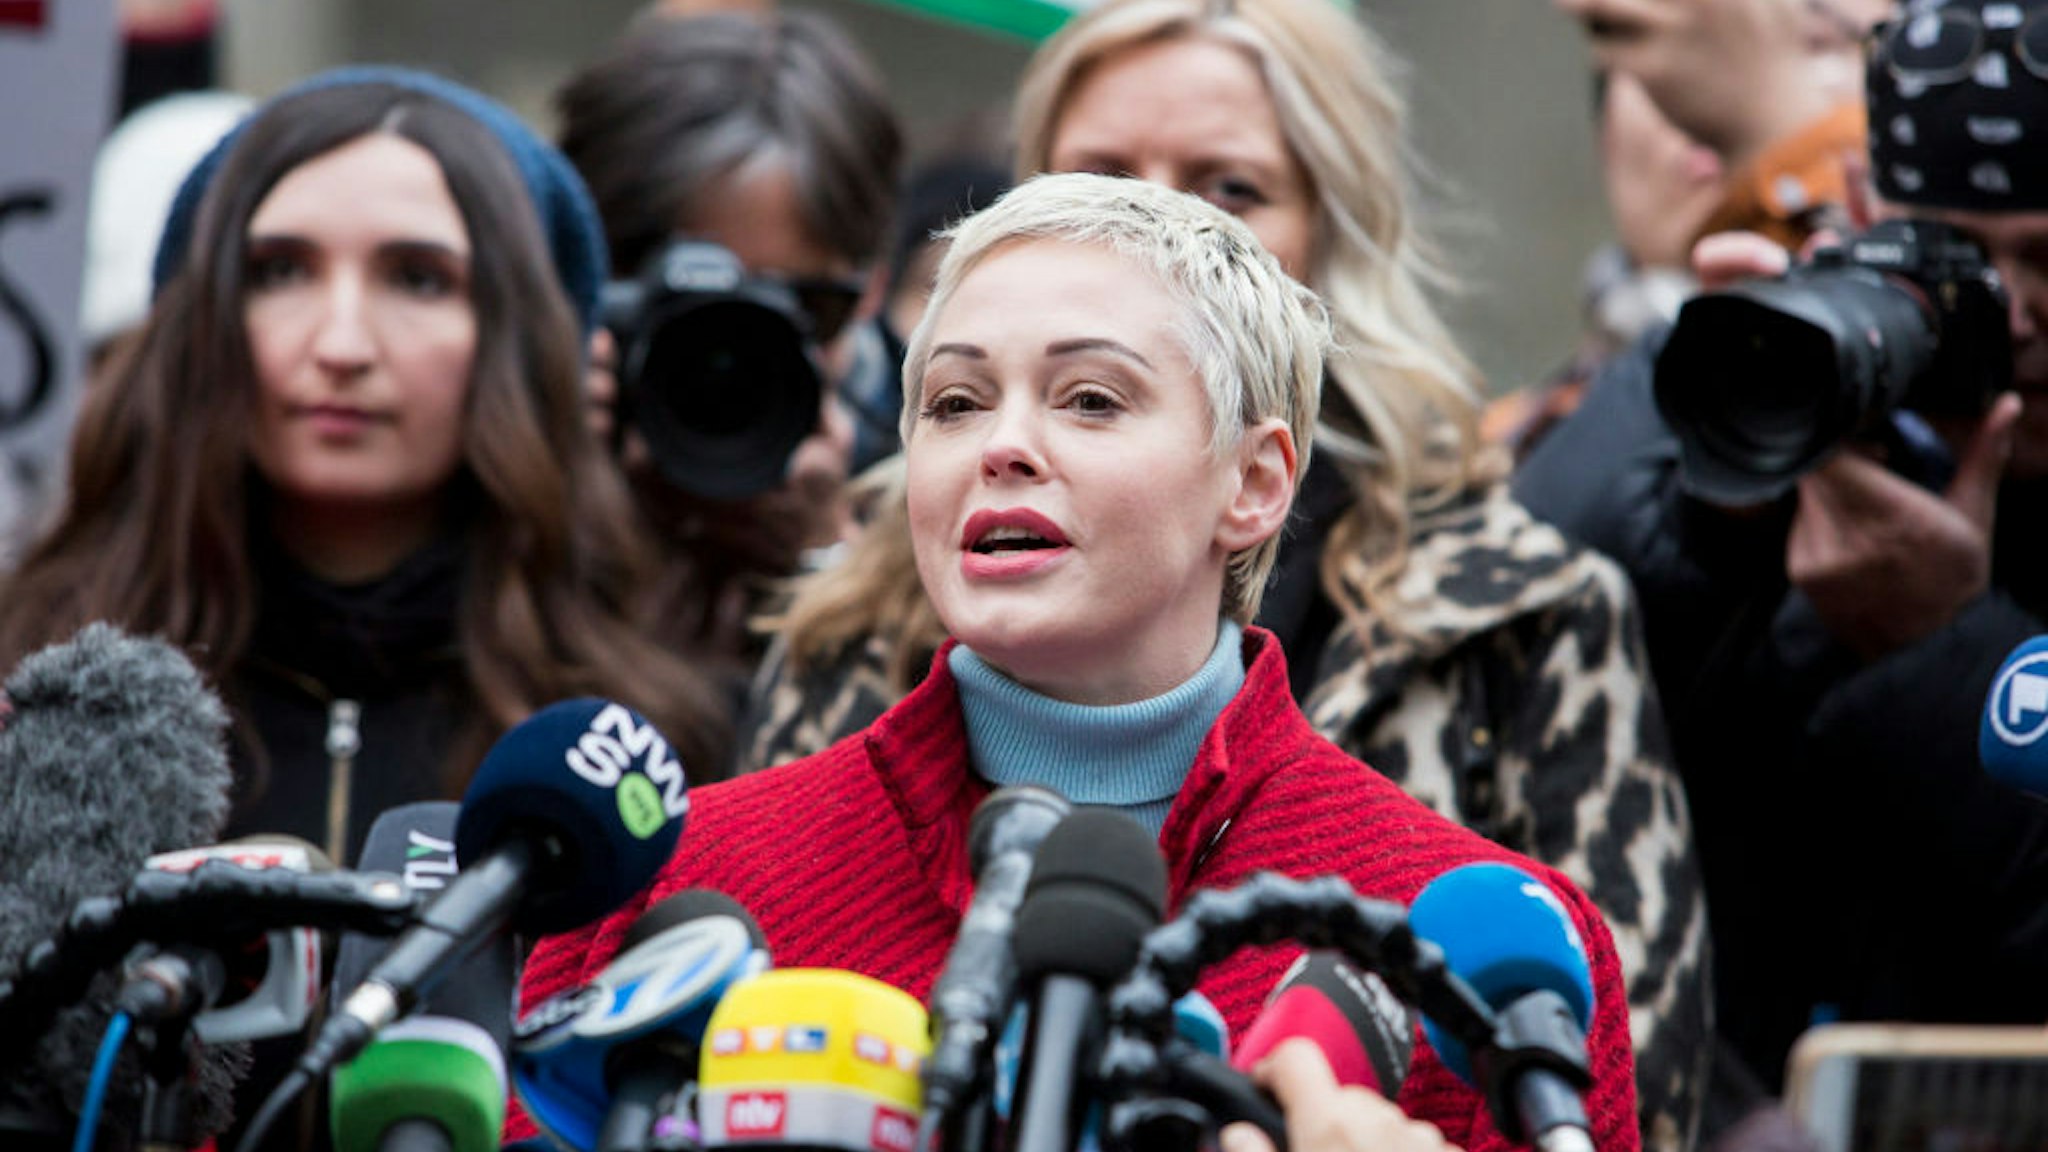 Actress Rose McGowan, who accused Weinstein of raping her and destroying her career, joins other accusers and protesters and speaks speech to the press as Harvey Weinstein arrived at the Manhattan courthouse on January 6, 2020 in New York City.